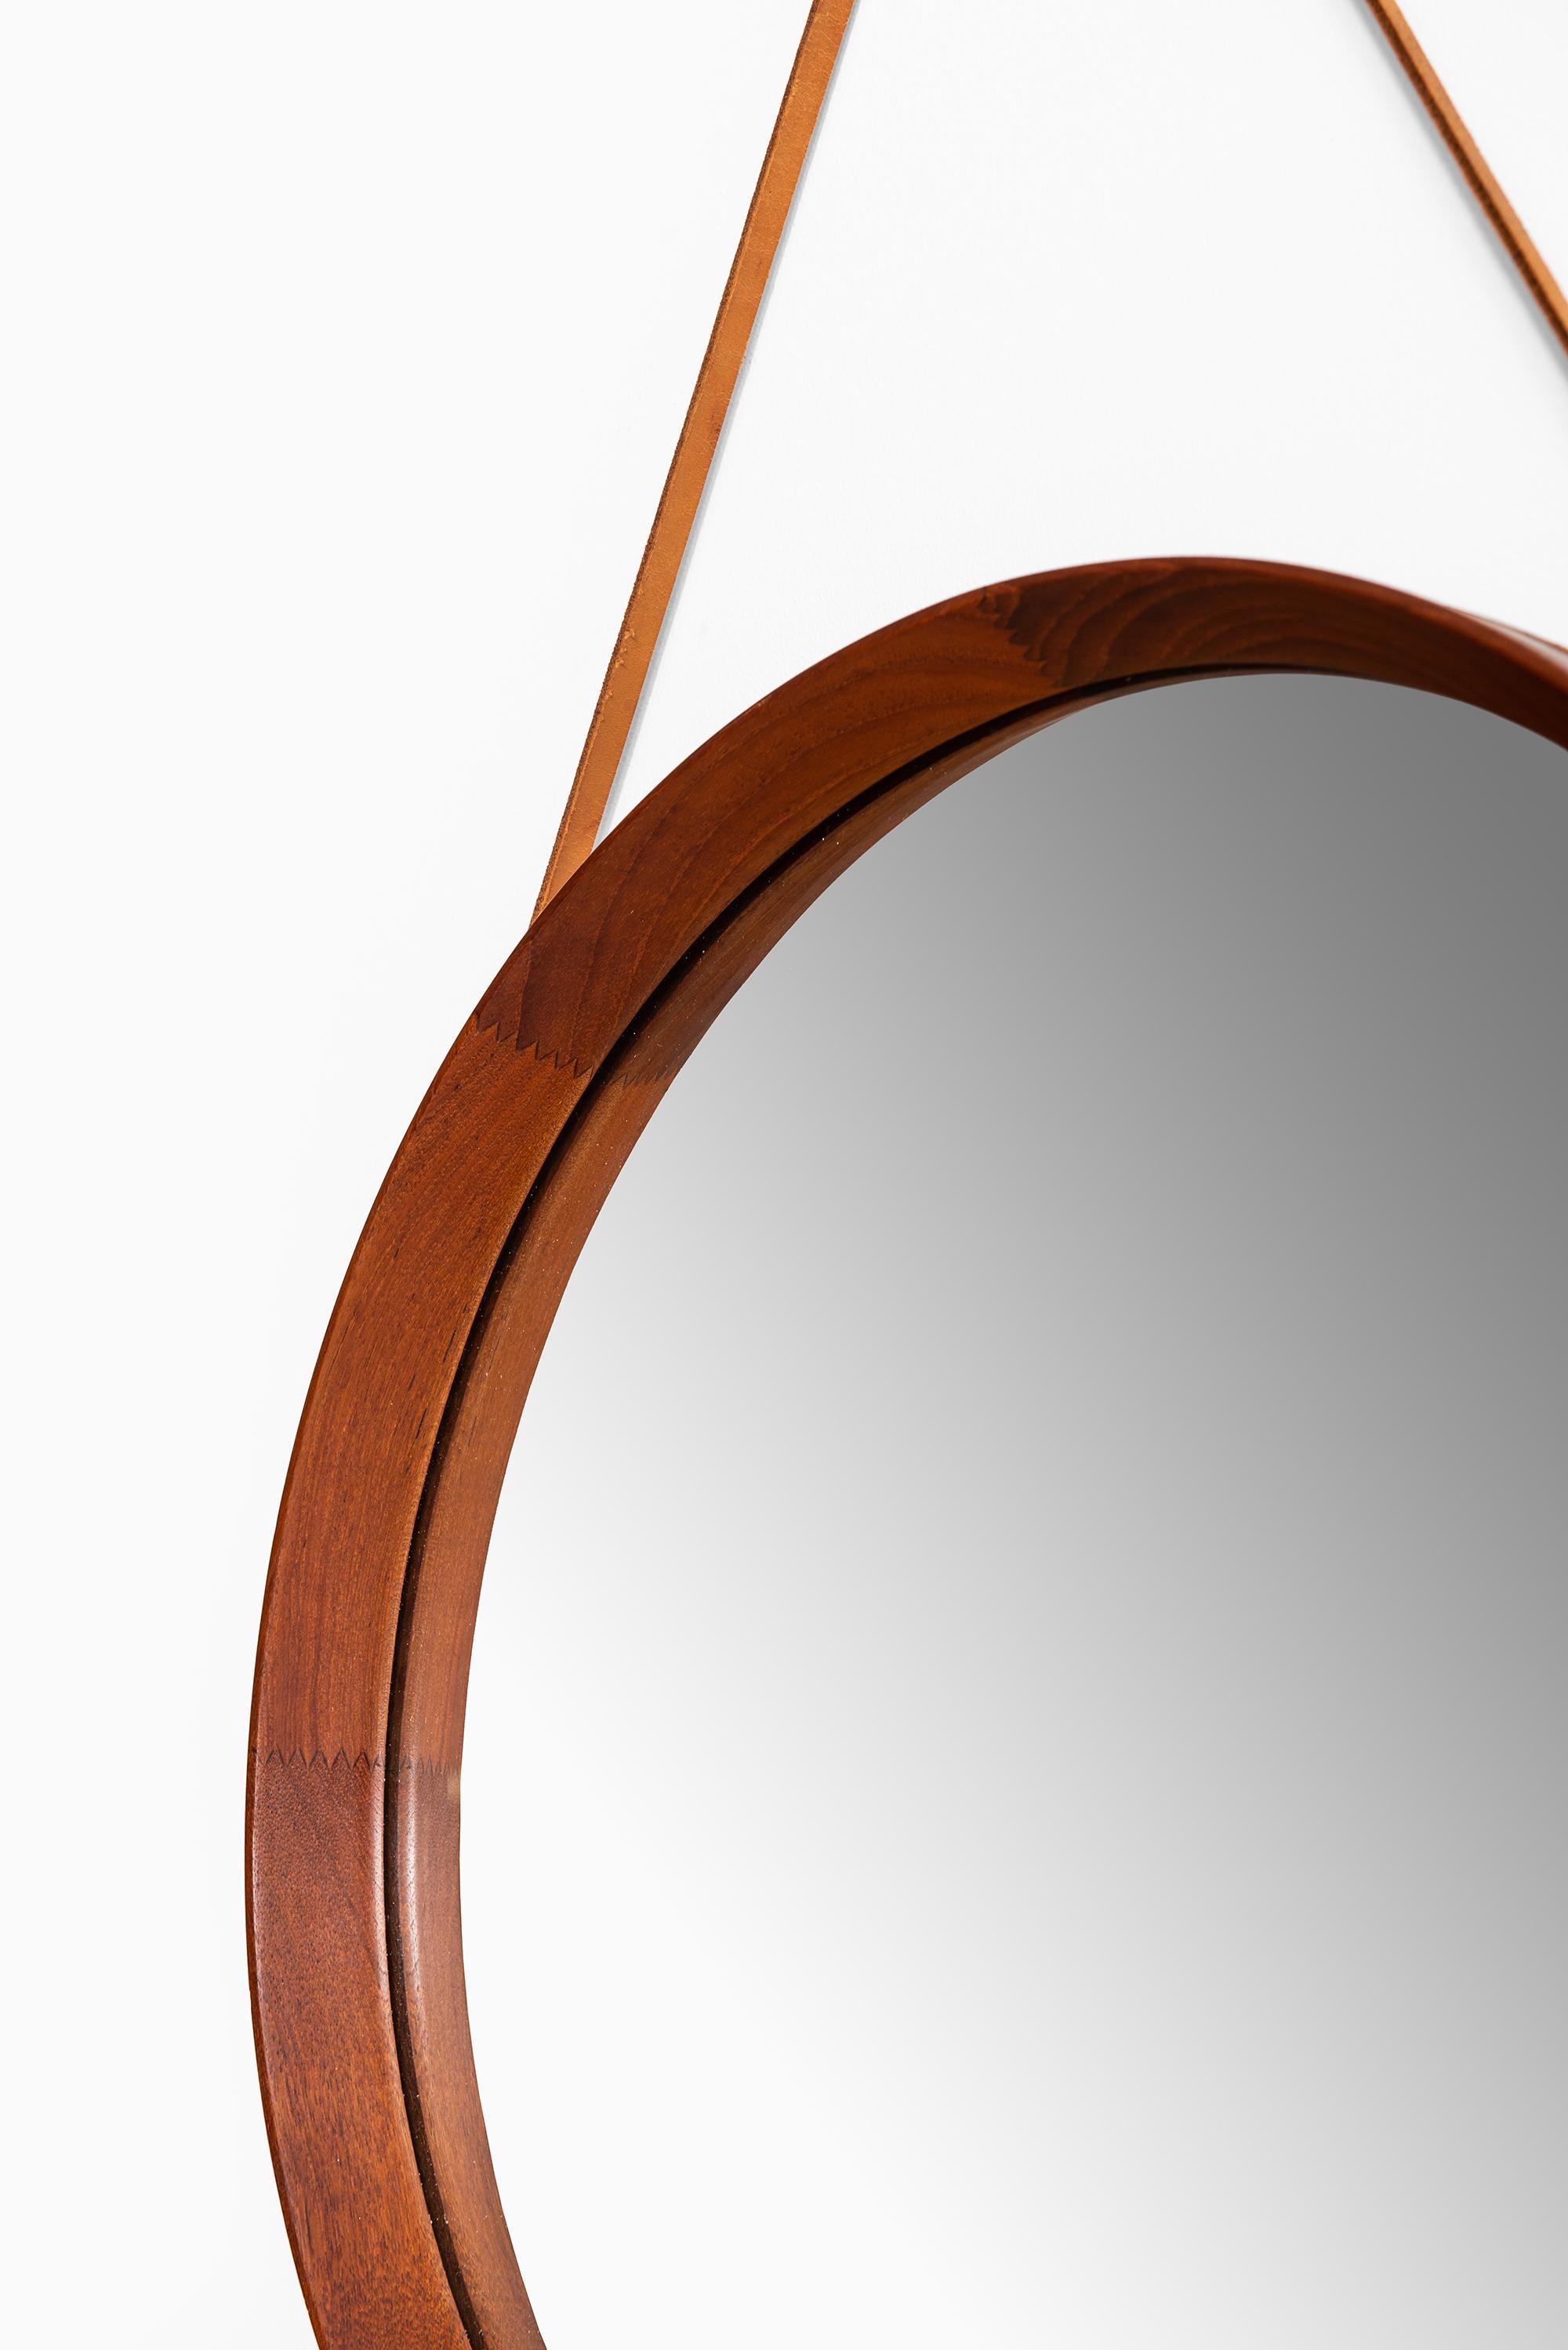 Rare mirror in leather and teak. Produced by Glas & Trä Hovmantorp in Sweden.